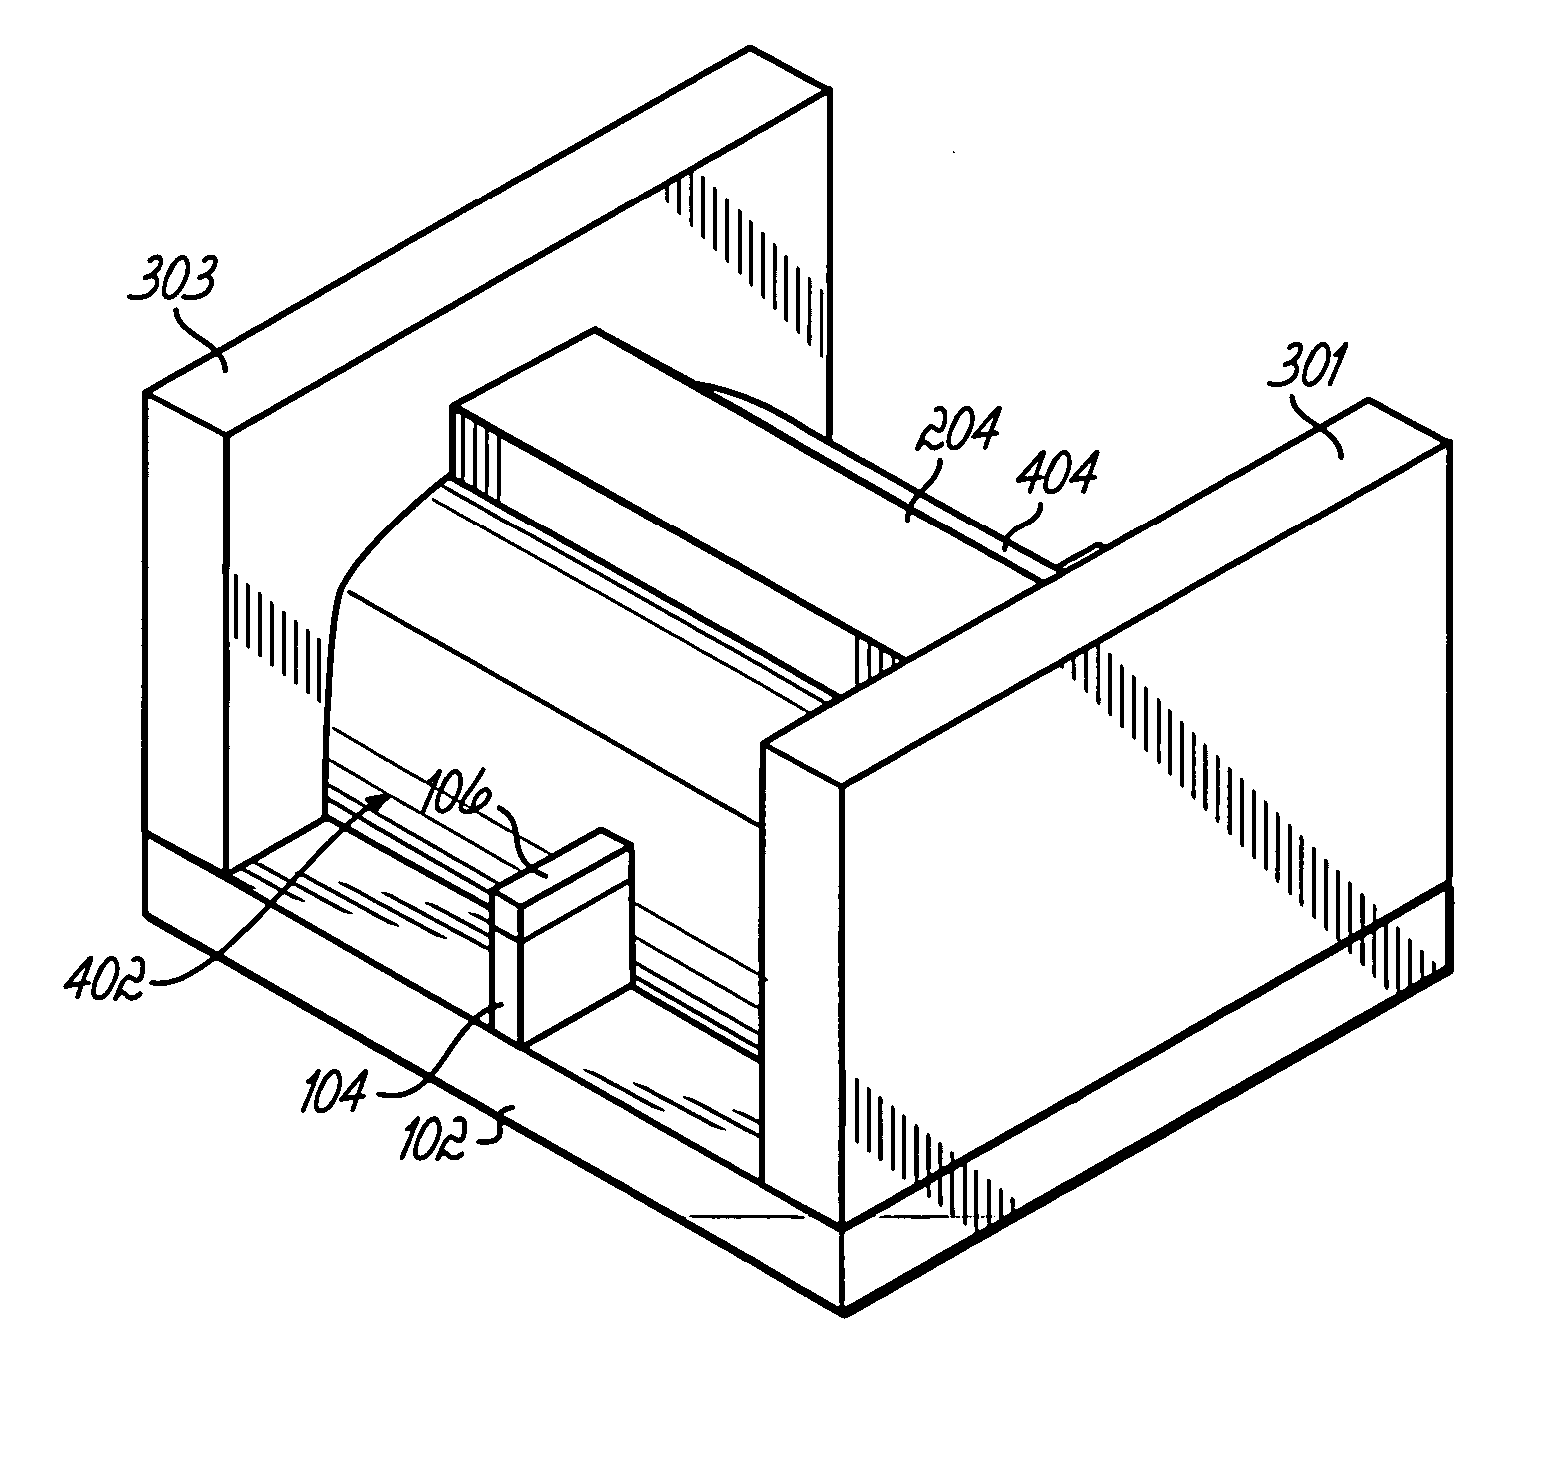 Method of forming FinFET gates without long etches